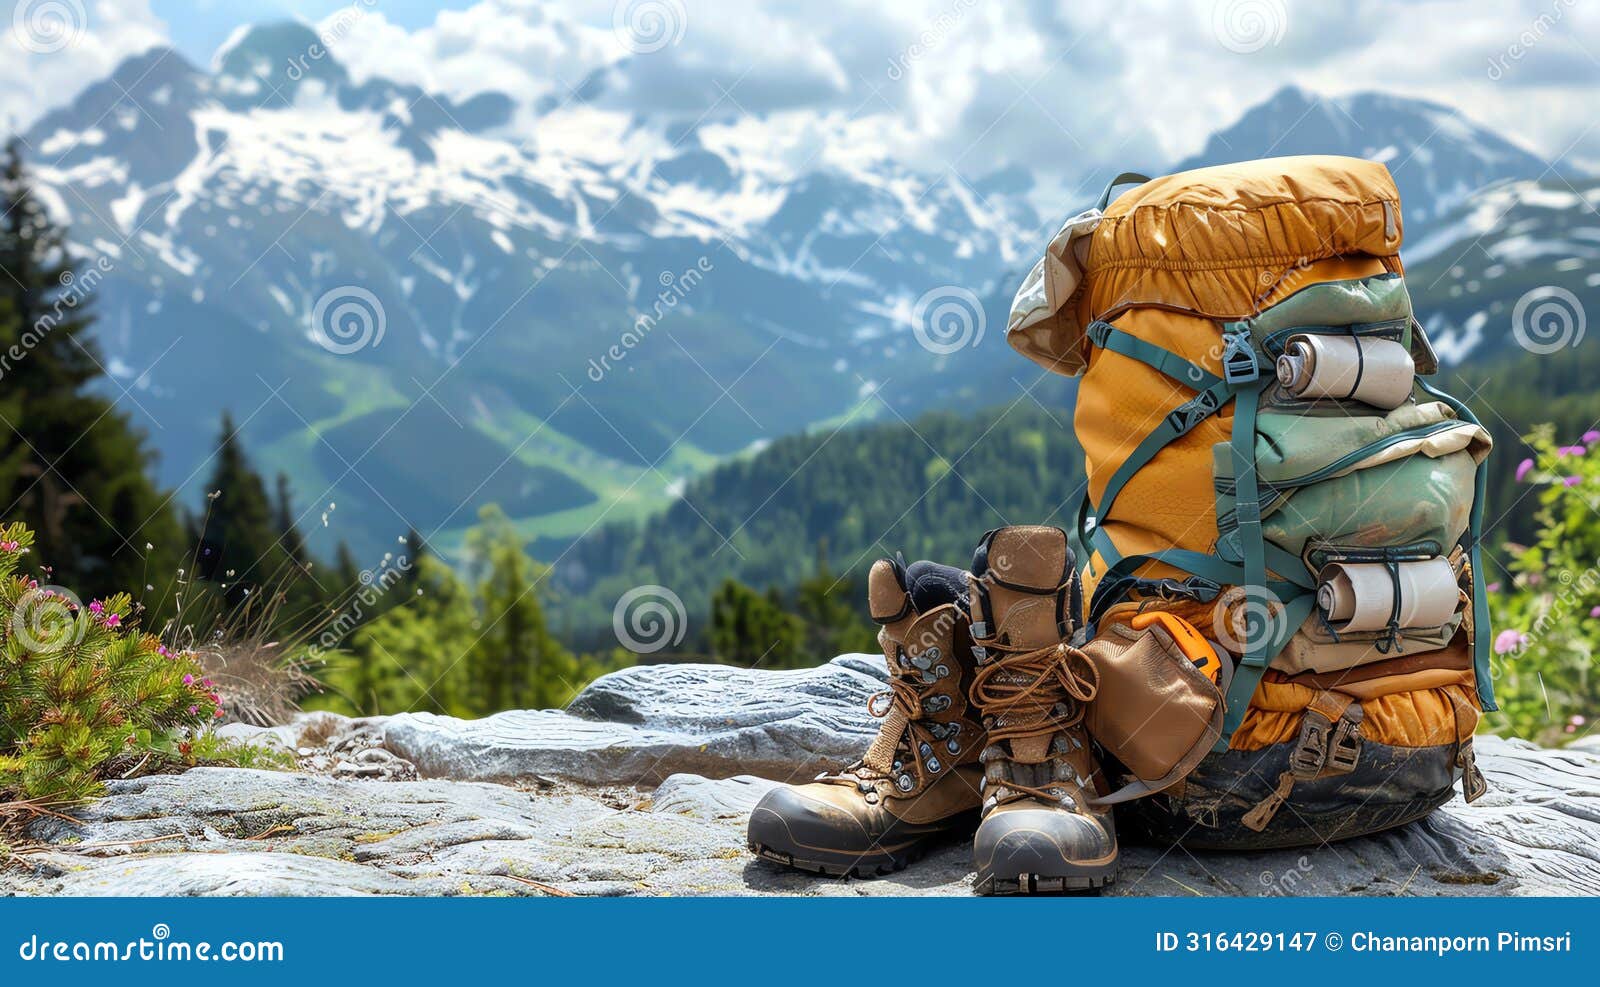 the backpack and boots of a hiker rest on a rocky outcropping overlooking a majestic mountain landscape